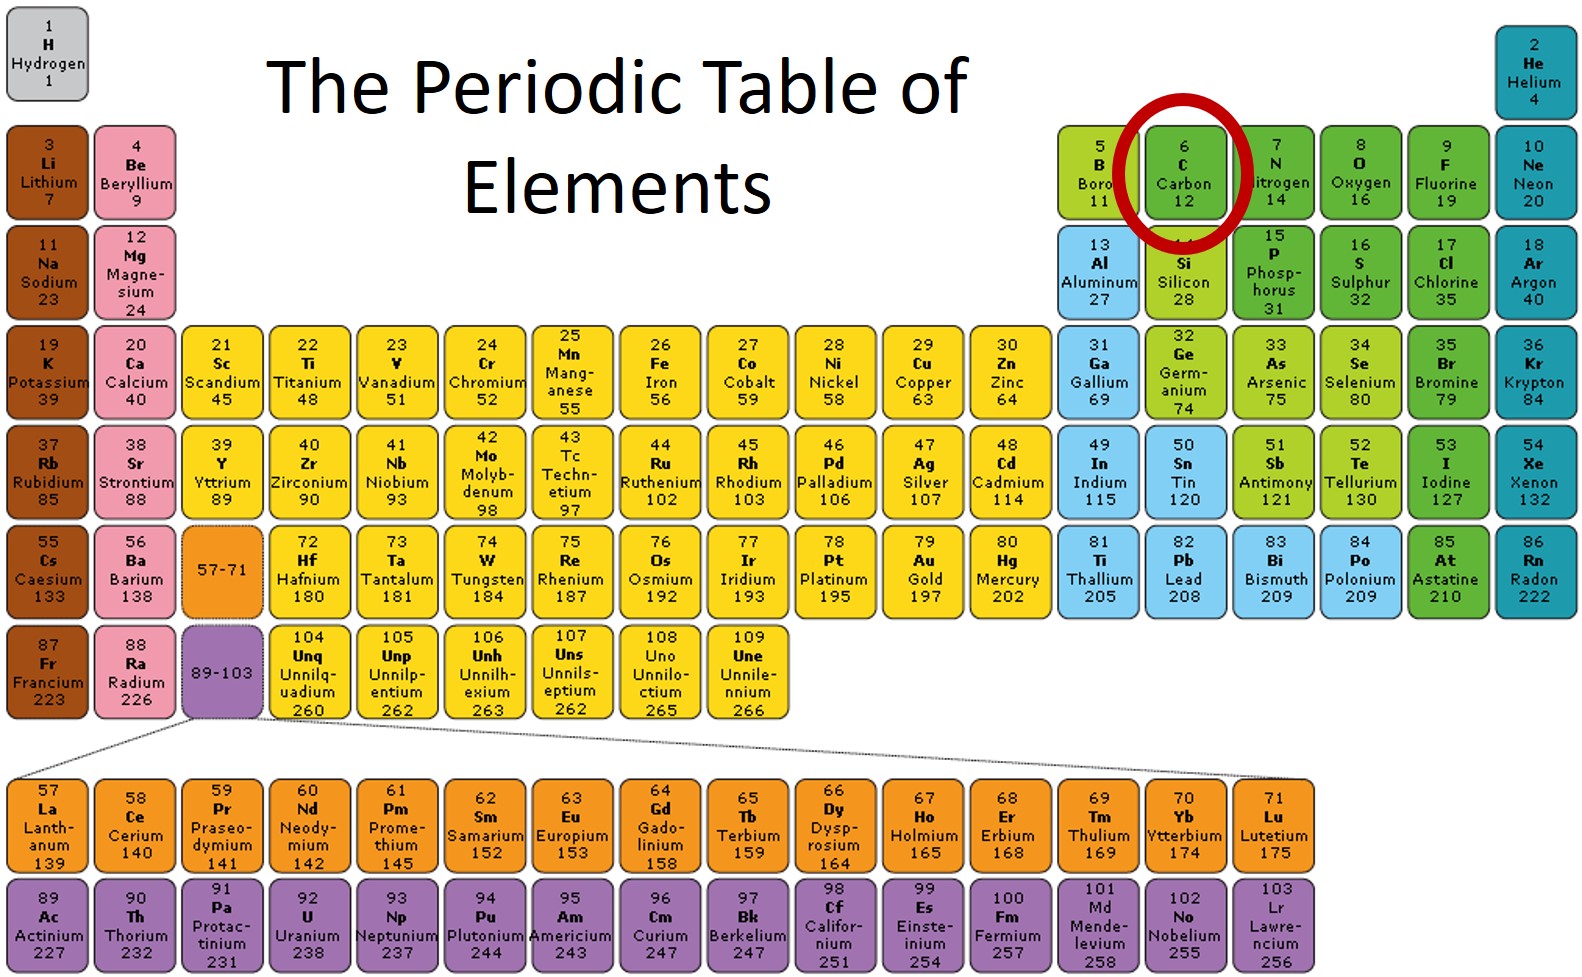 A version of the Periodic Table